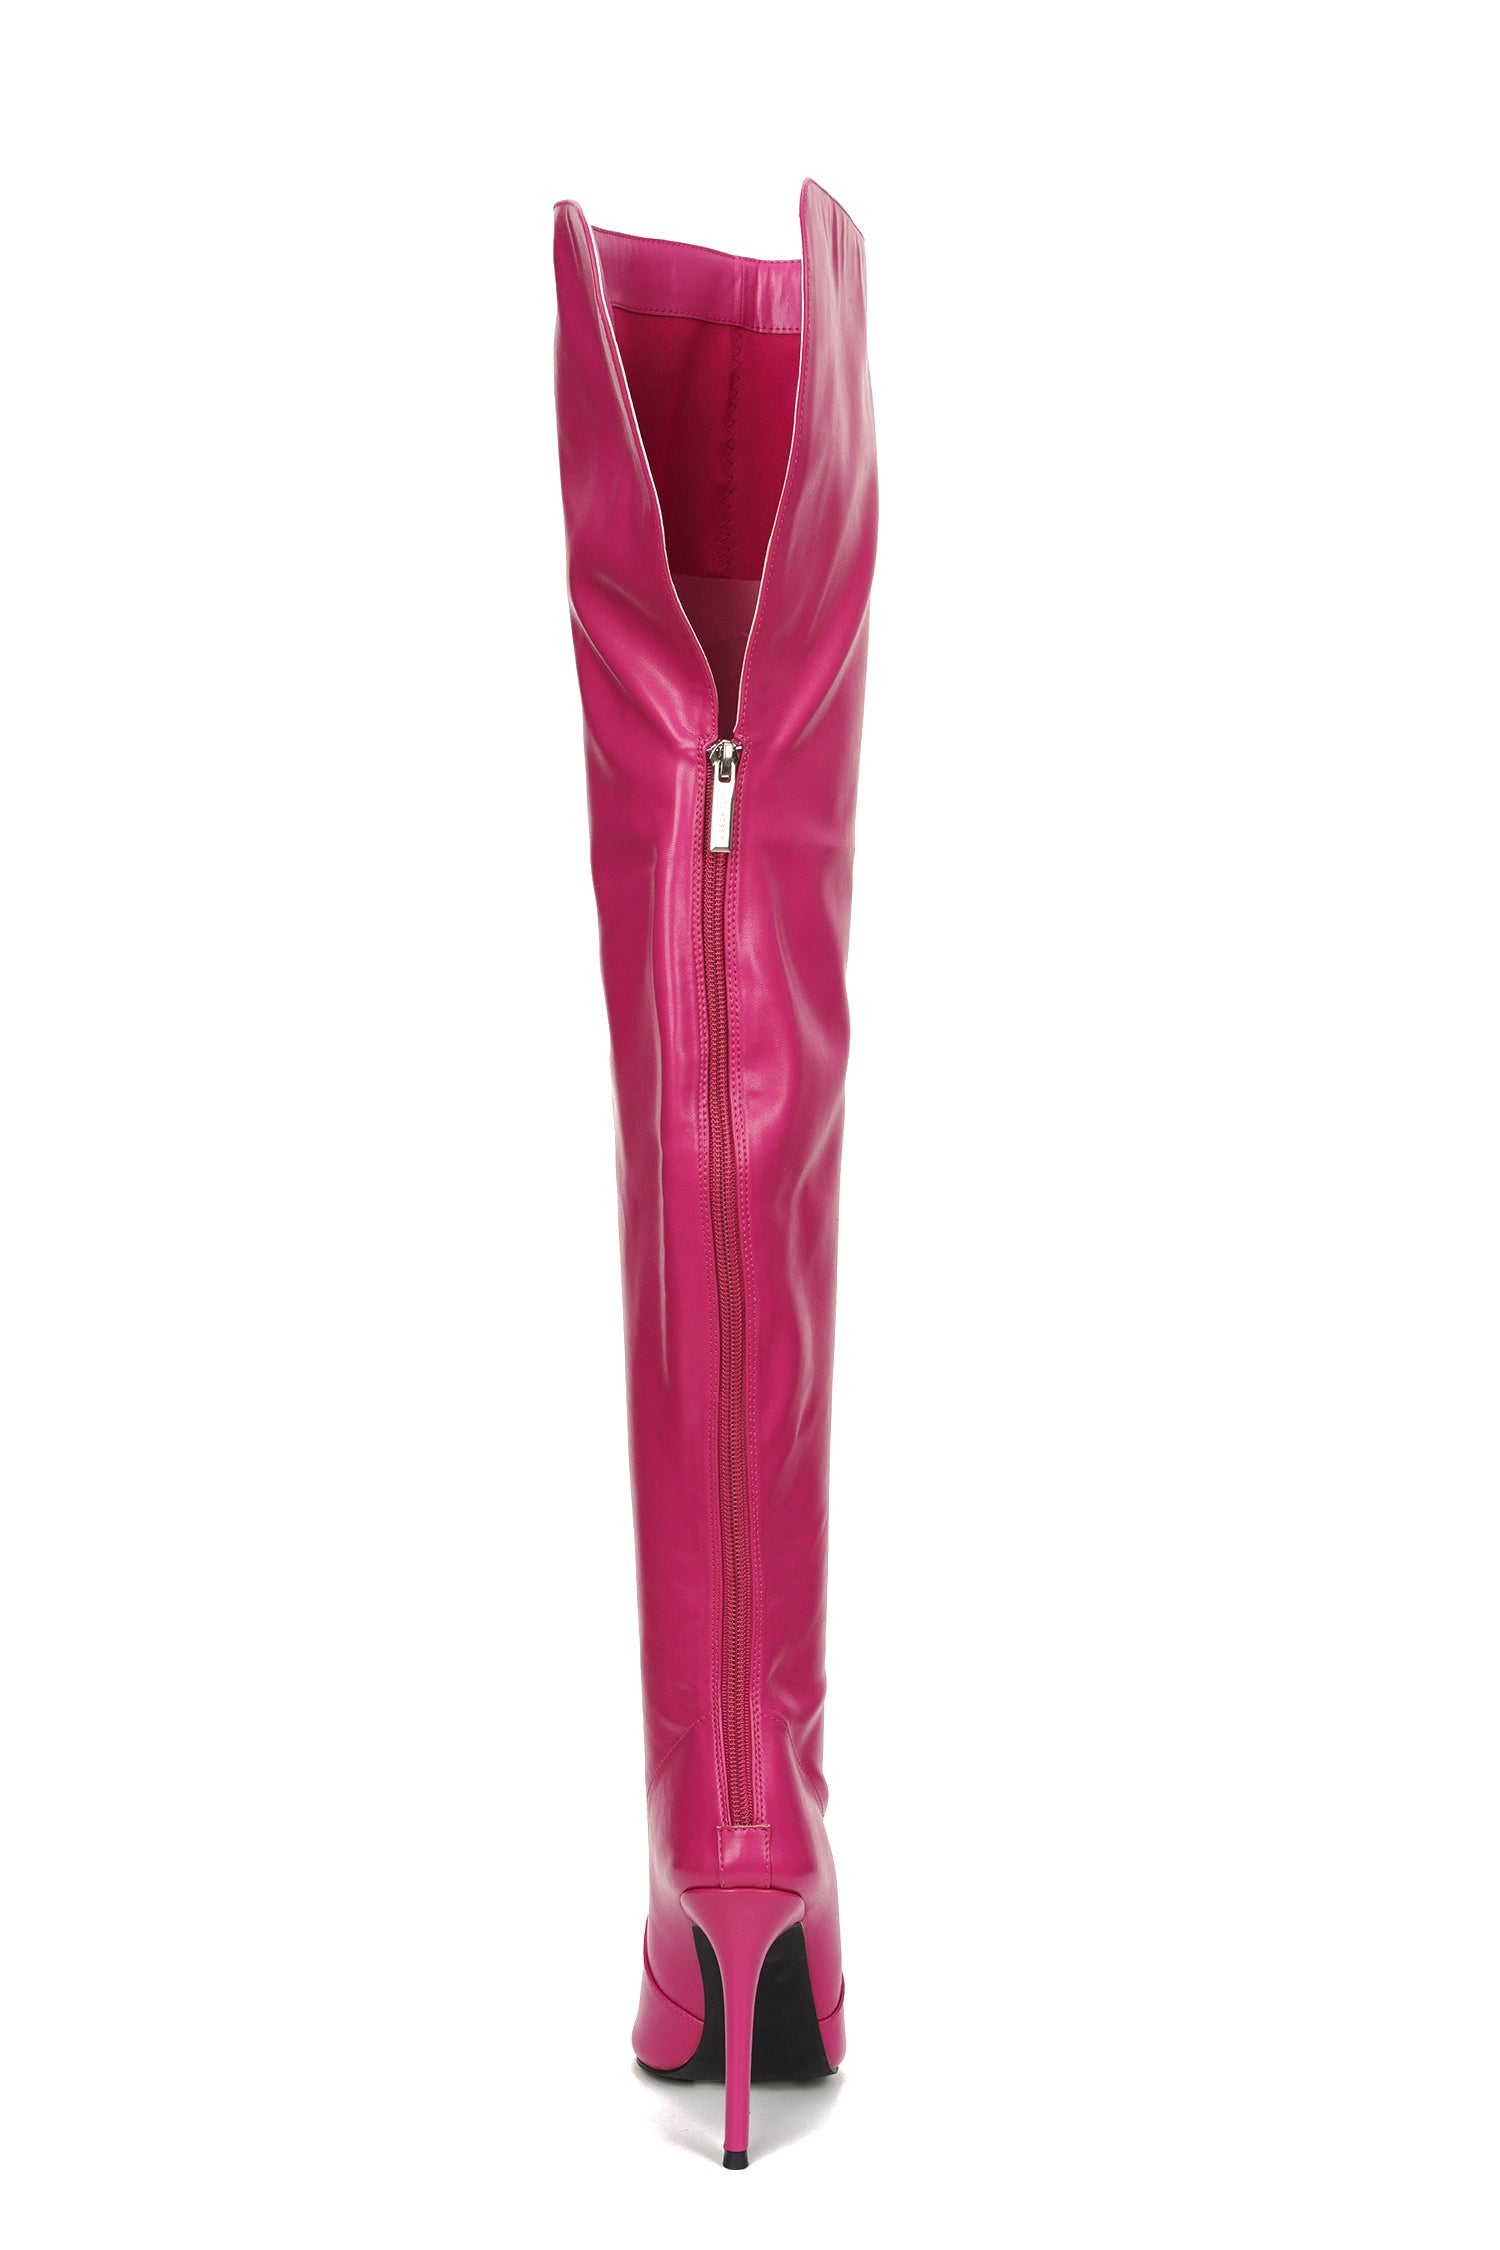 UrbanOG - Toxic Pointy Toe Thigh High Boots - BOOTS